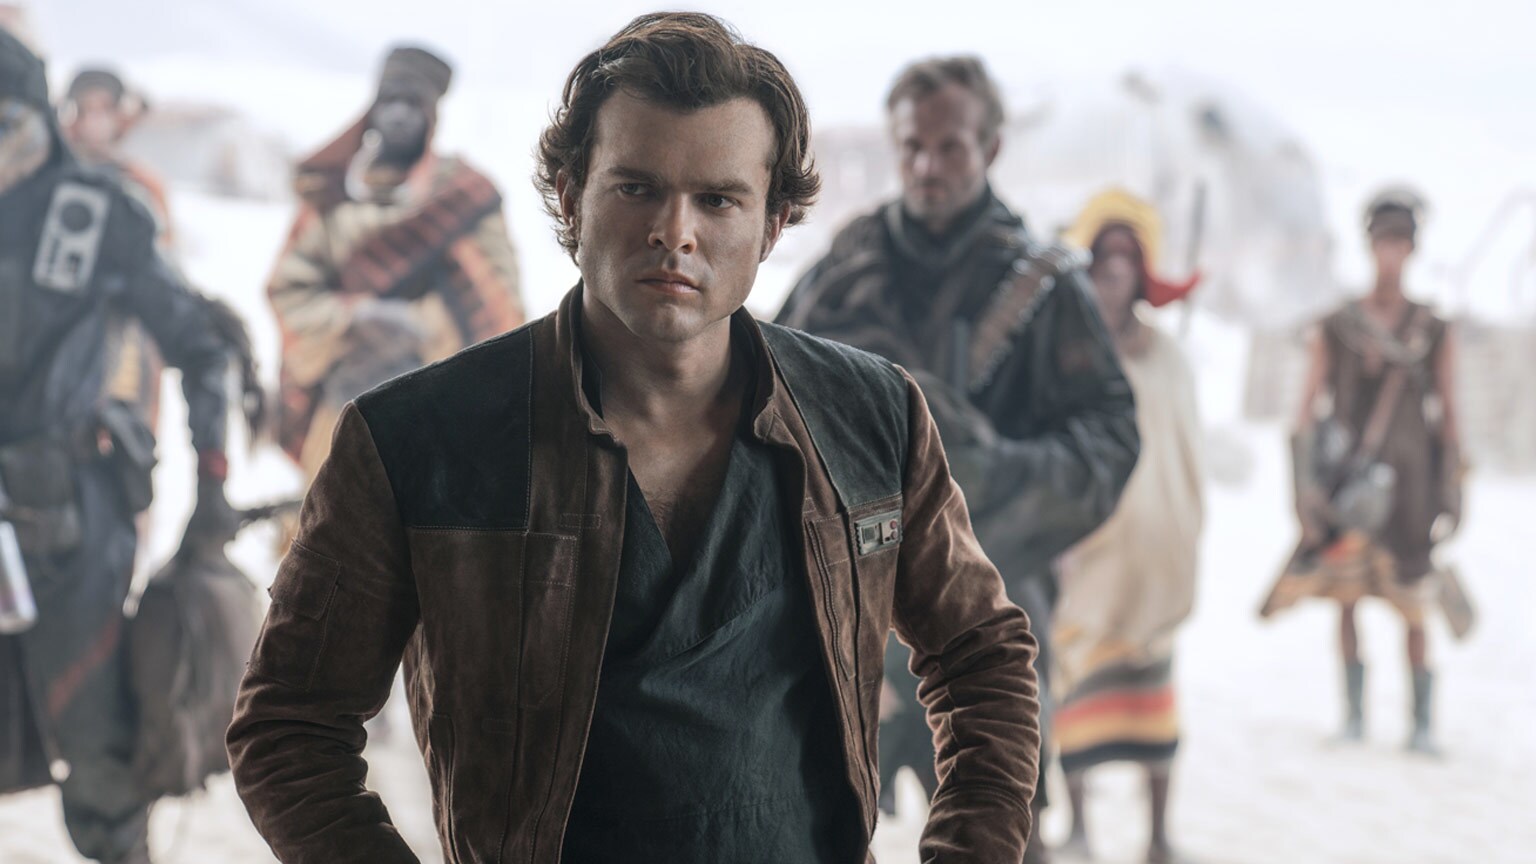 New Solo: A Star Wars Story Photos and Details Revealed